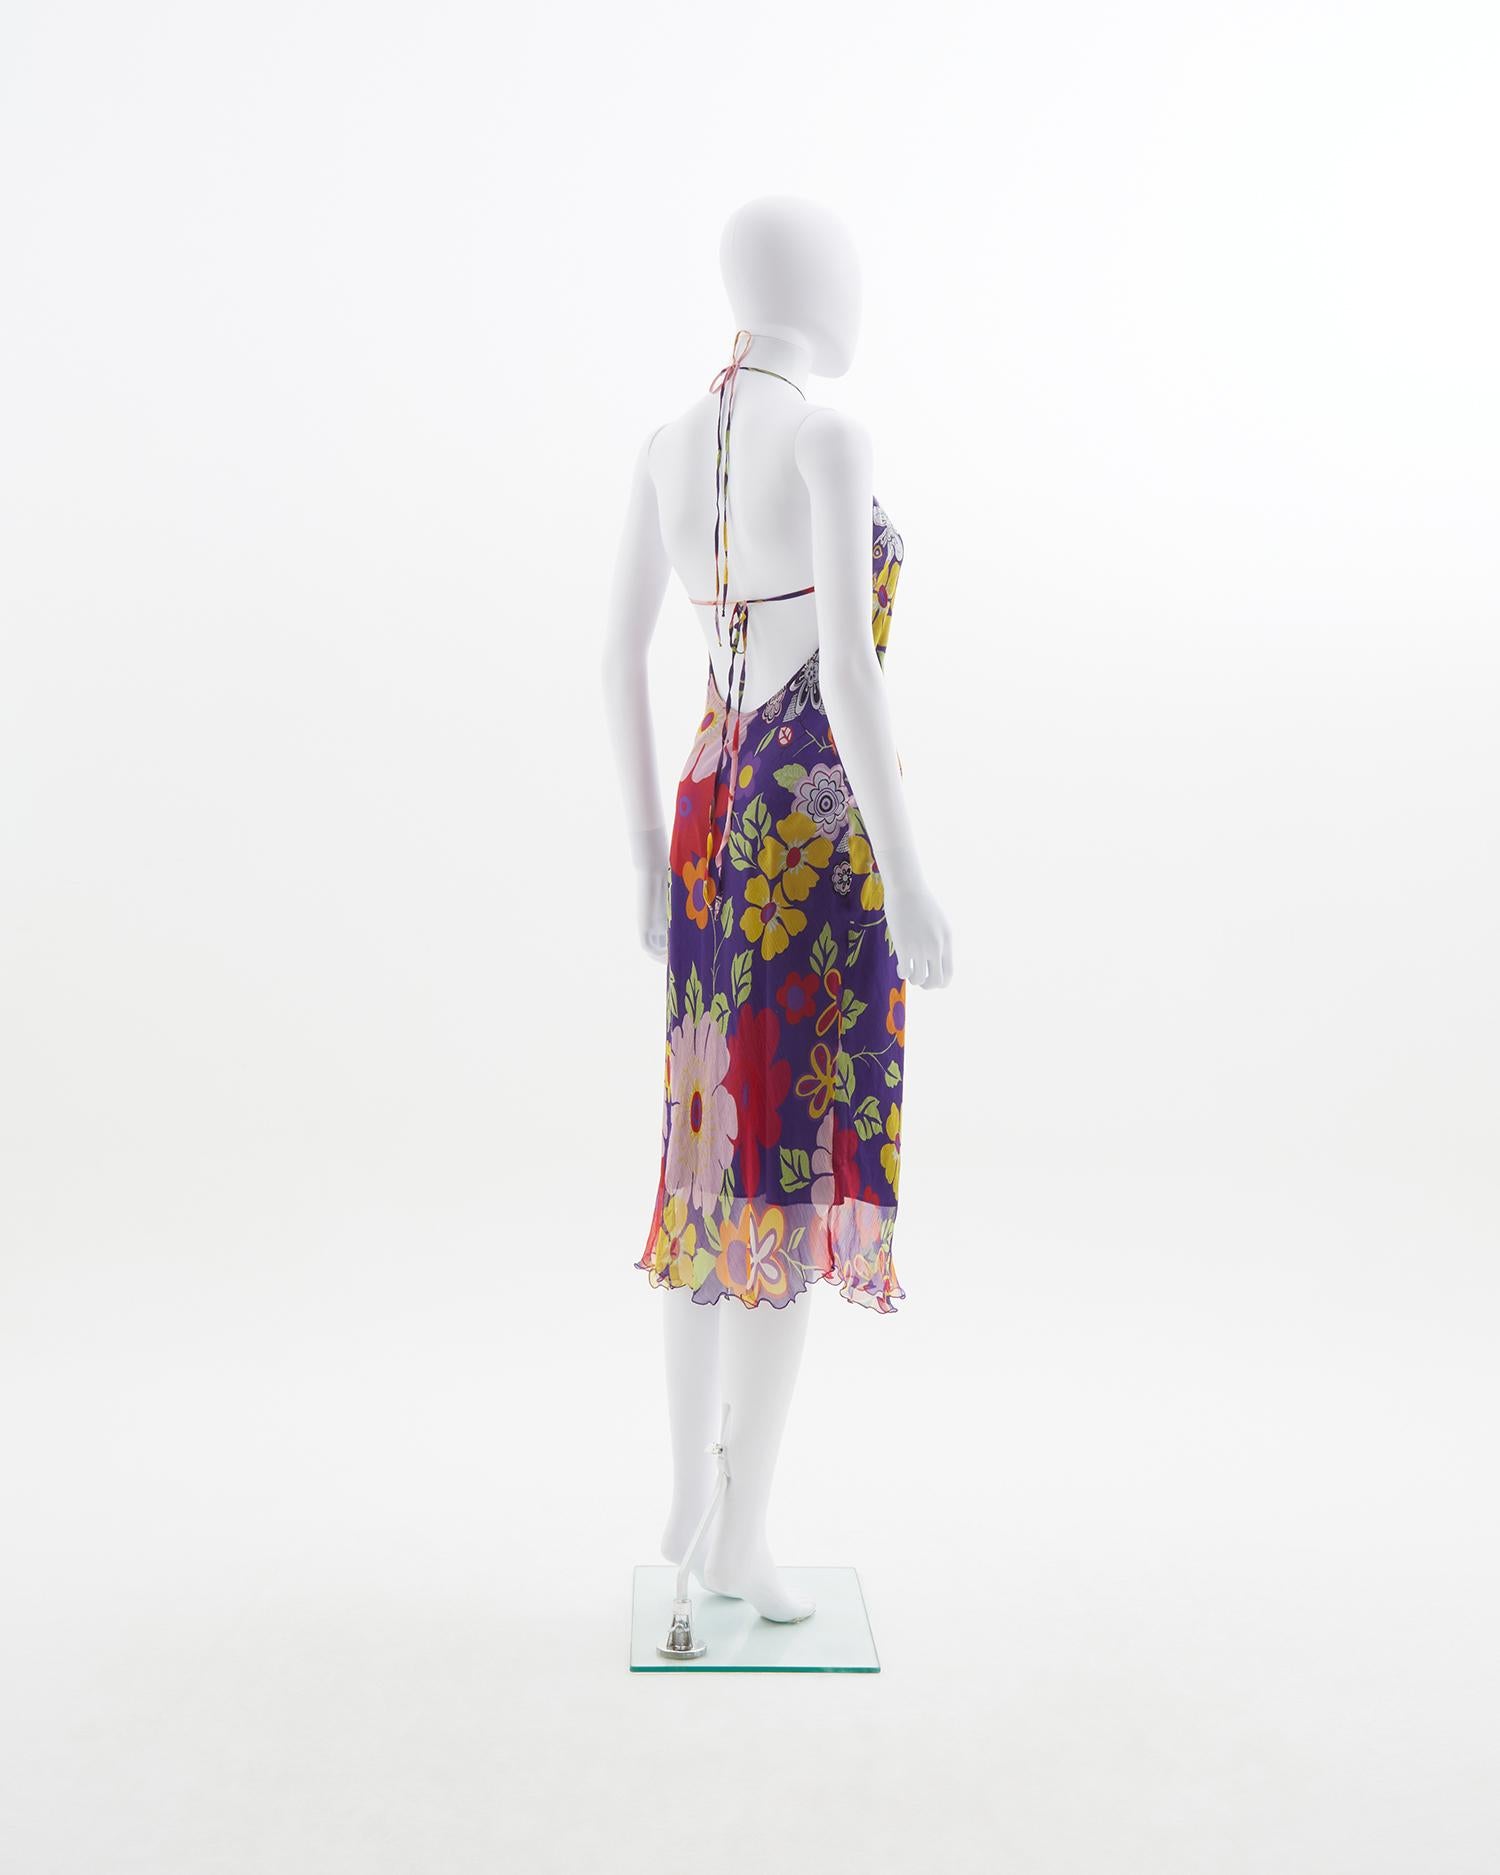 Versace Jeans Couture floral print open back silk dress, ealry 2000s

- Versace jeans couture floral print silk dress
- Sold by Skof.Archive
- Designed by Gianni Versace 
- Early 2000s
- Open back 
- Adjustable American neckline

Size:
FR 38 - IT 42